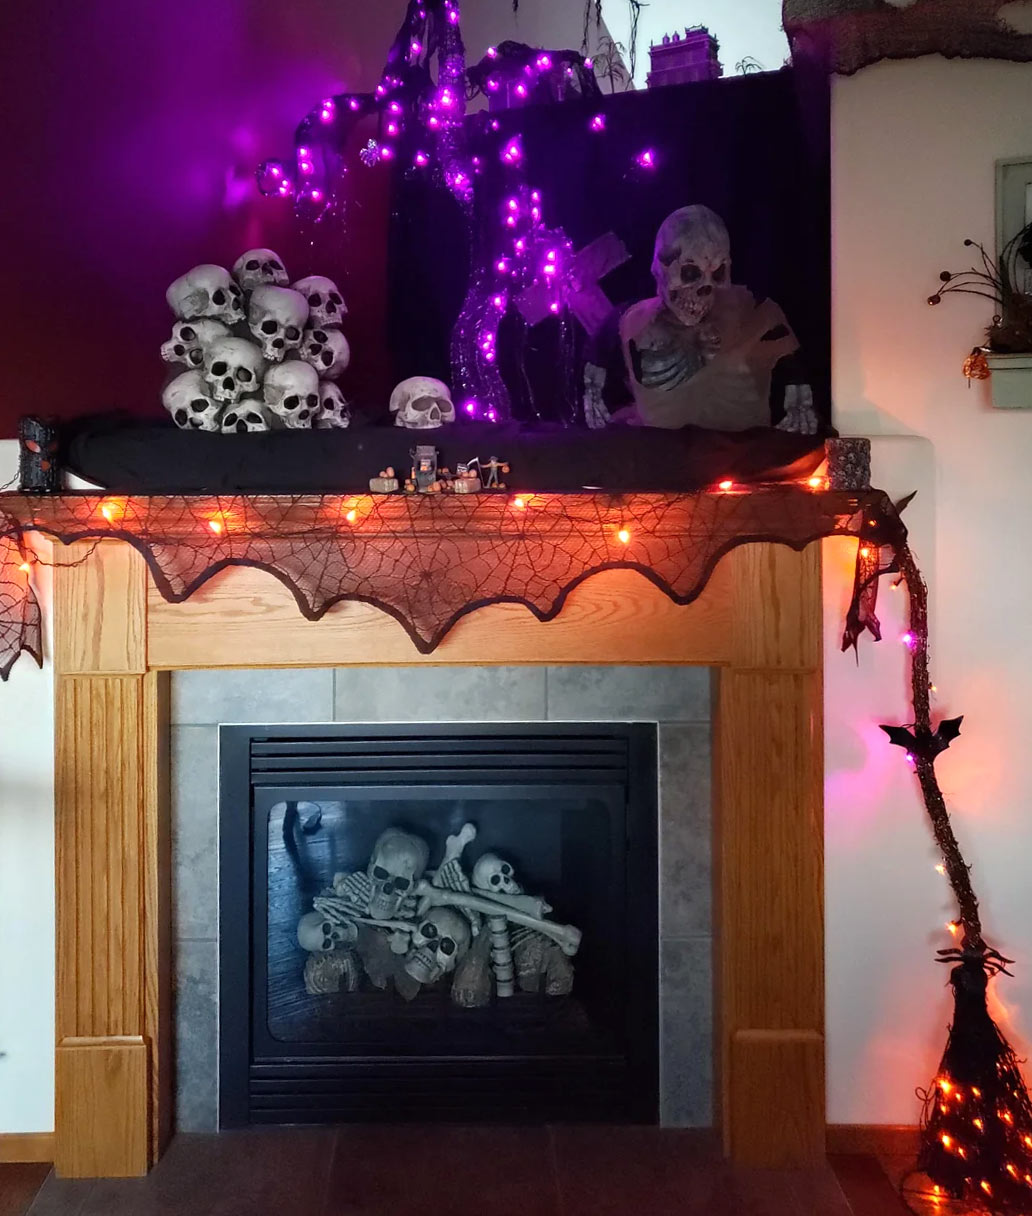 Fireplace decorated with skulls and broom